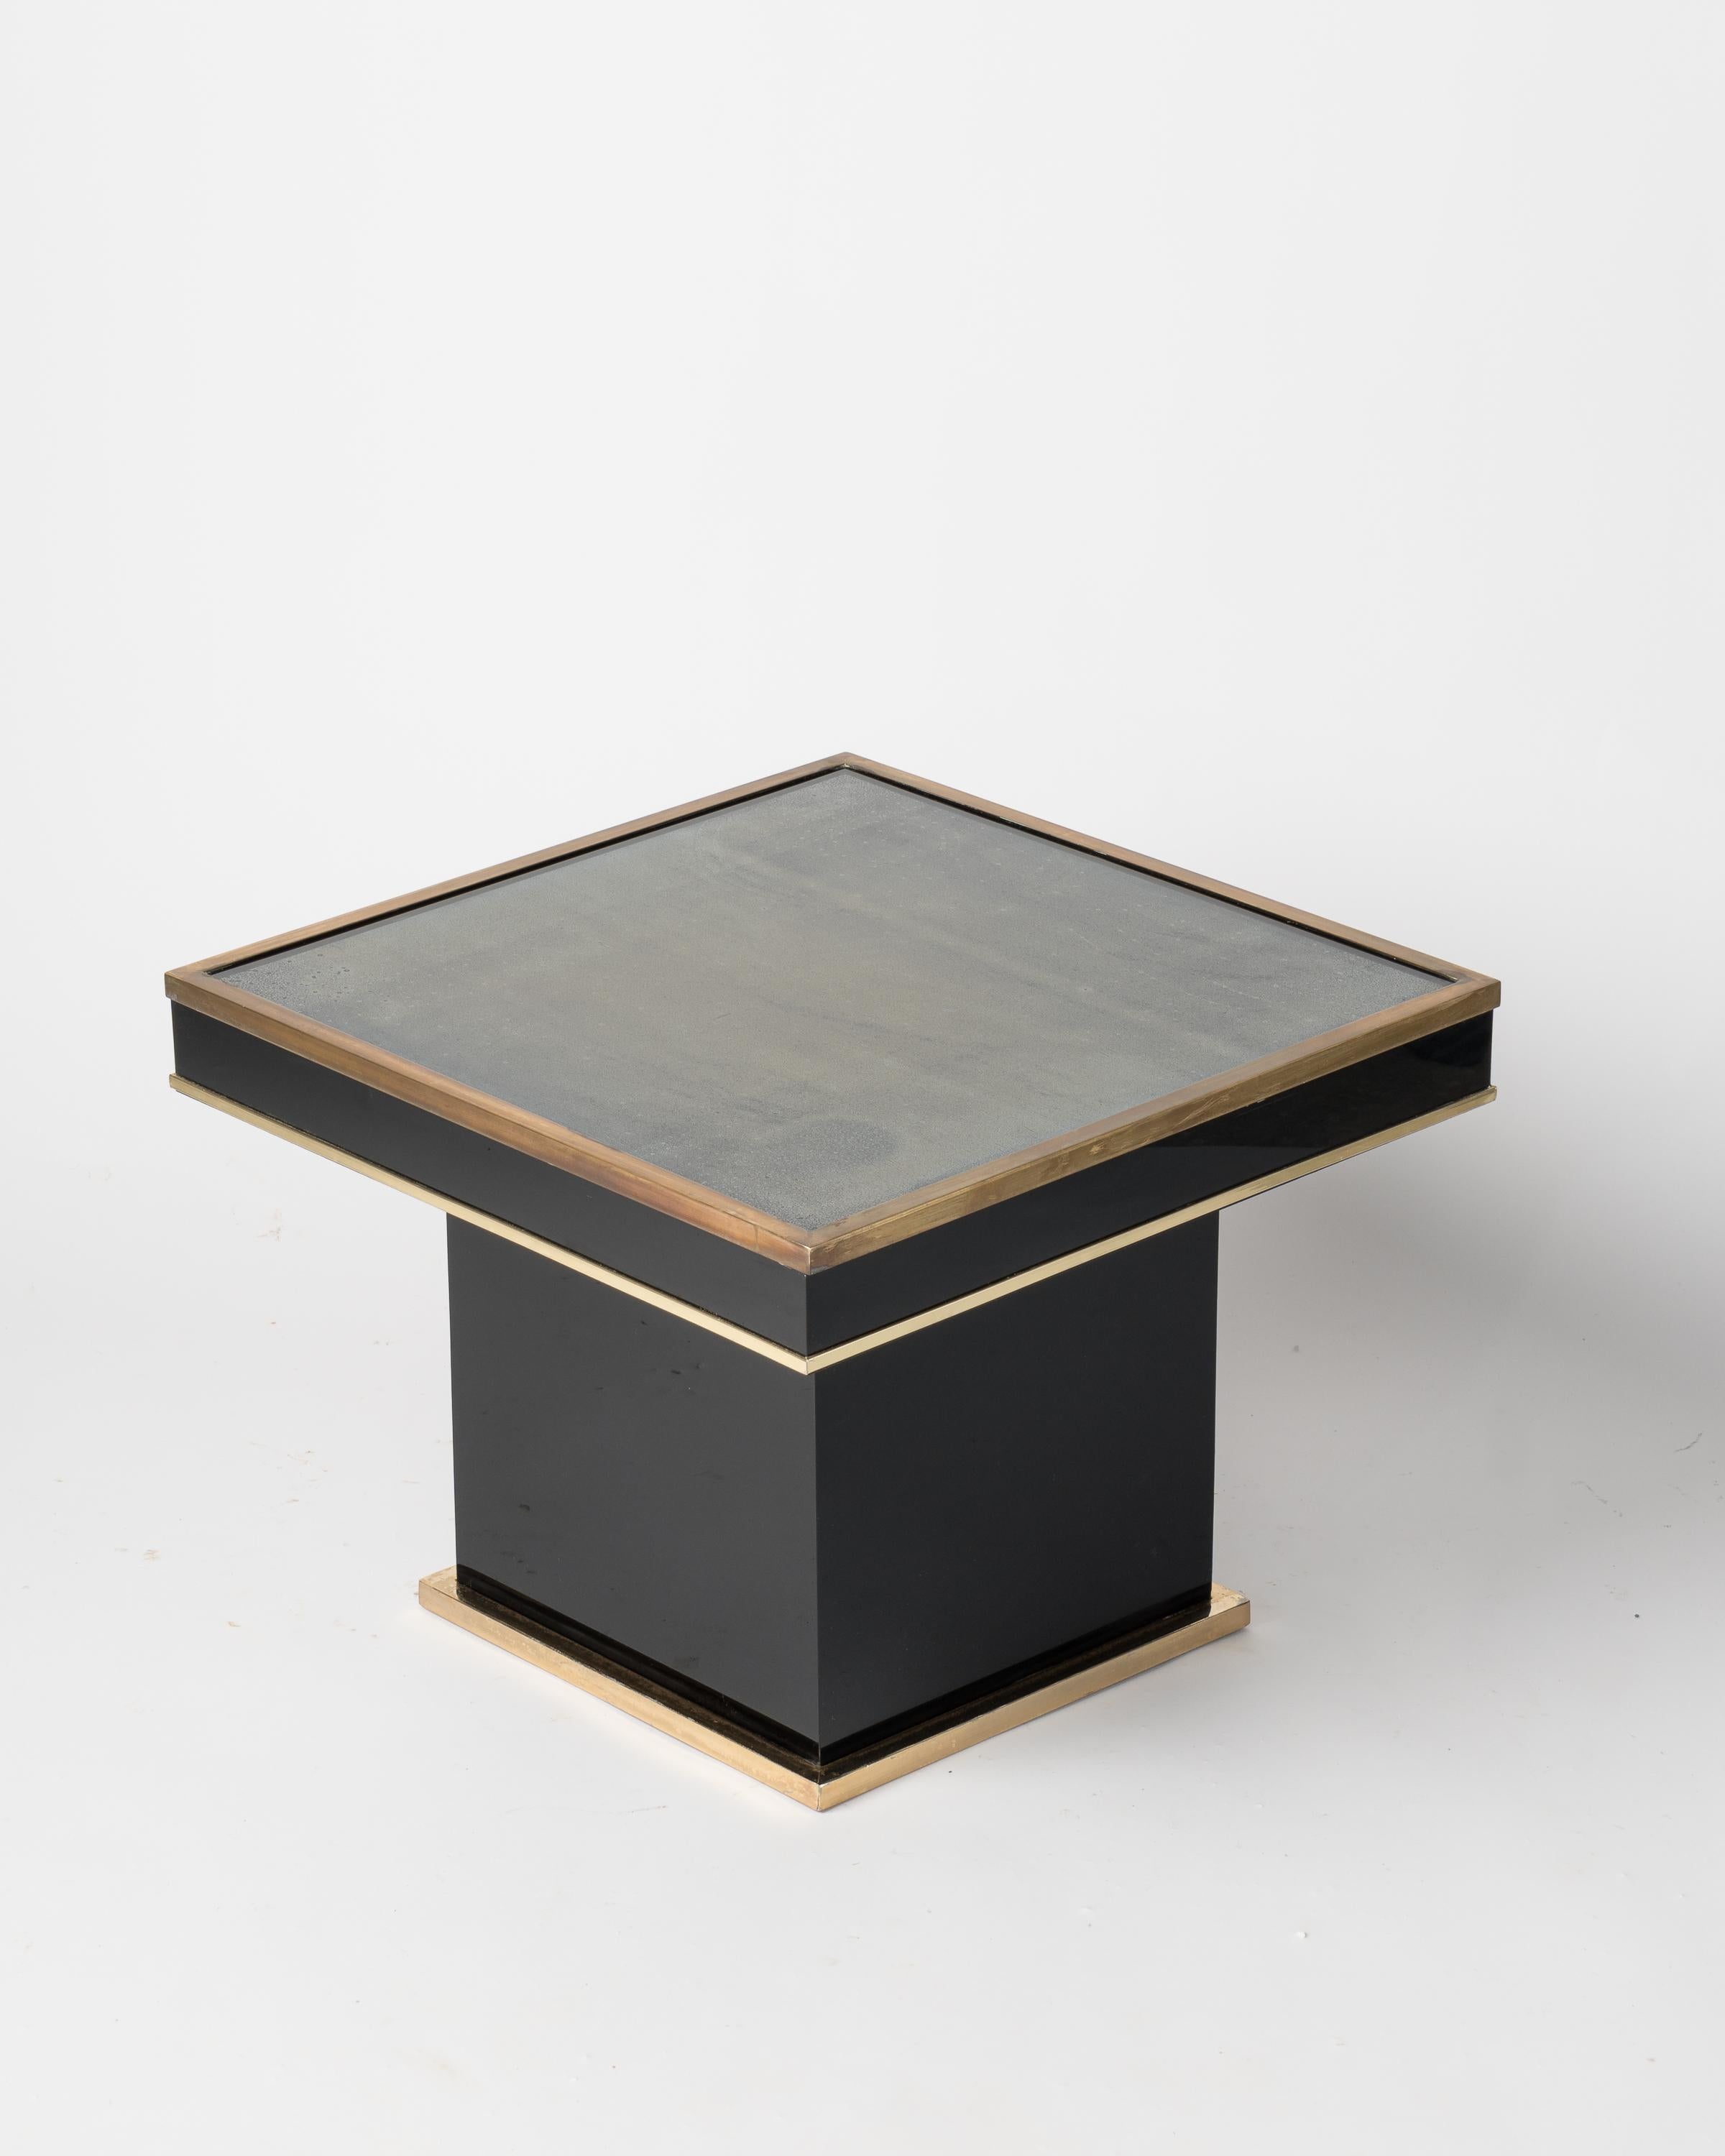 Black laminate, gilt and patinated brass side table.
Glass top has some minor scratches.
In overall good vintage condition.
some of the patina has been voluntarily left as is.
This table will ship from France and can be returned to either France